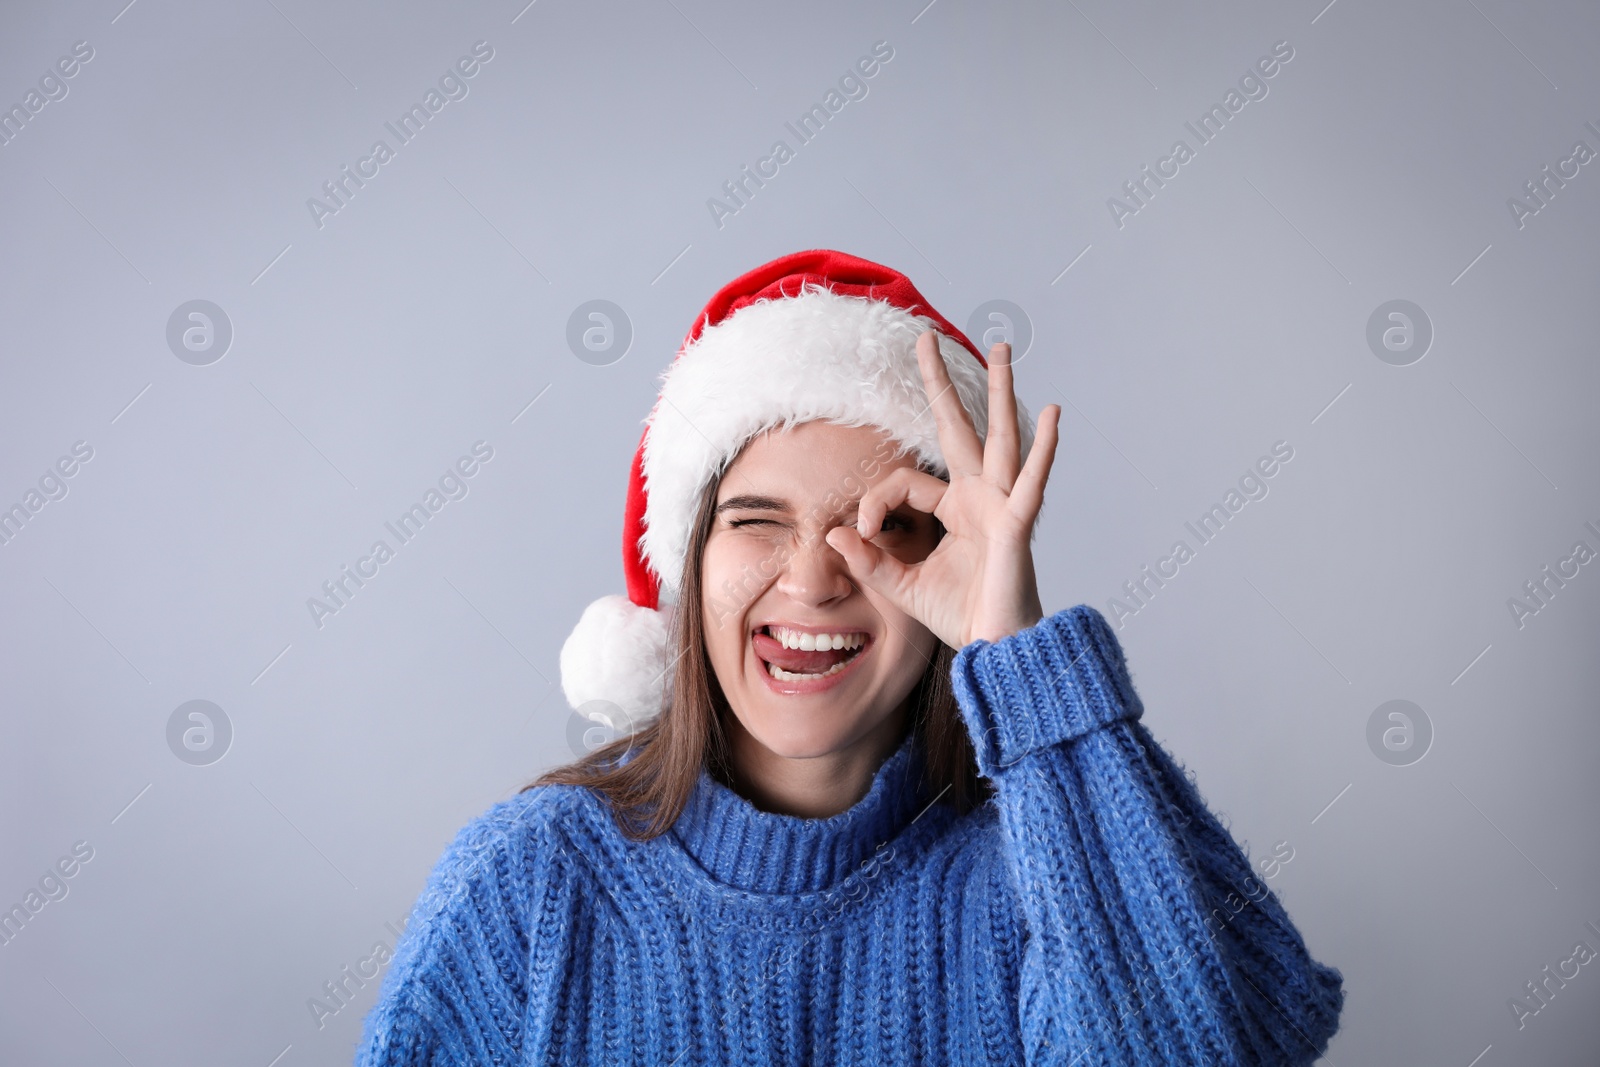 Photo of Playful woman in Santa hat and blue sweater showing OK gesture on grey background